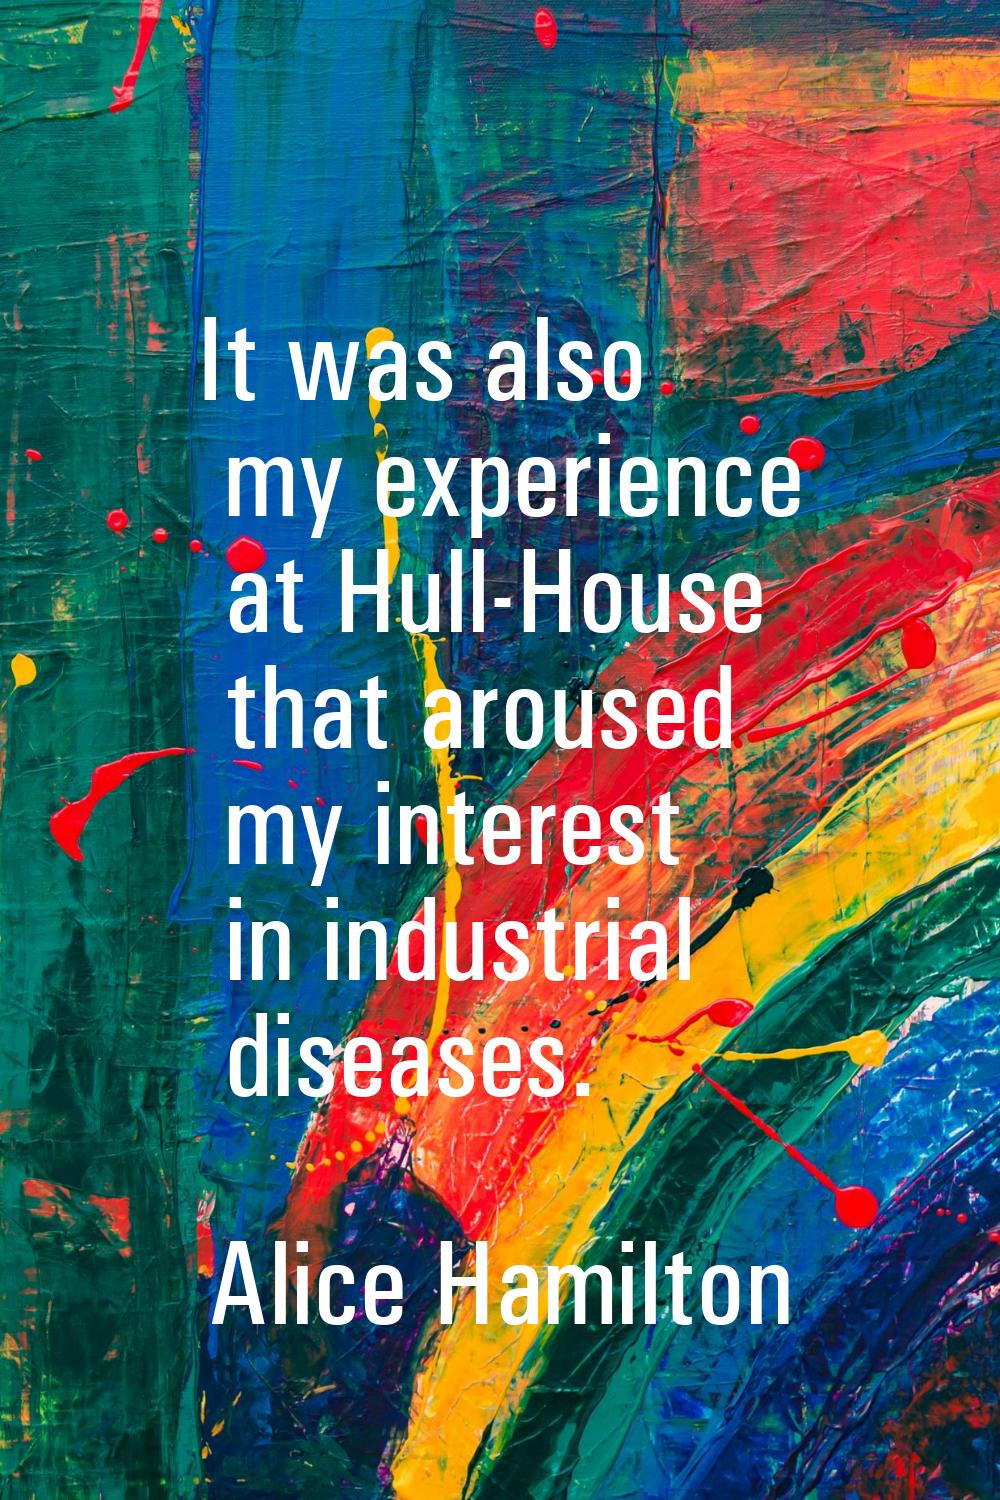 It was also my experience at Hull-House that aroused my interest in industrial diseases.